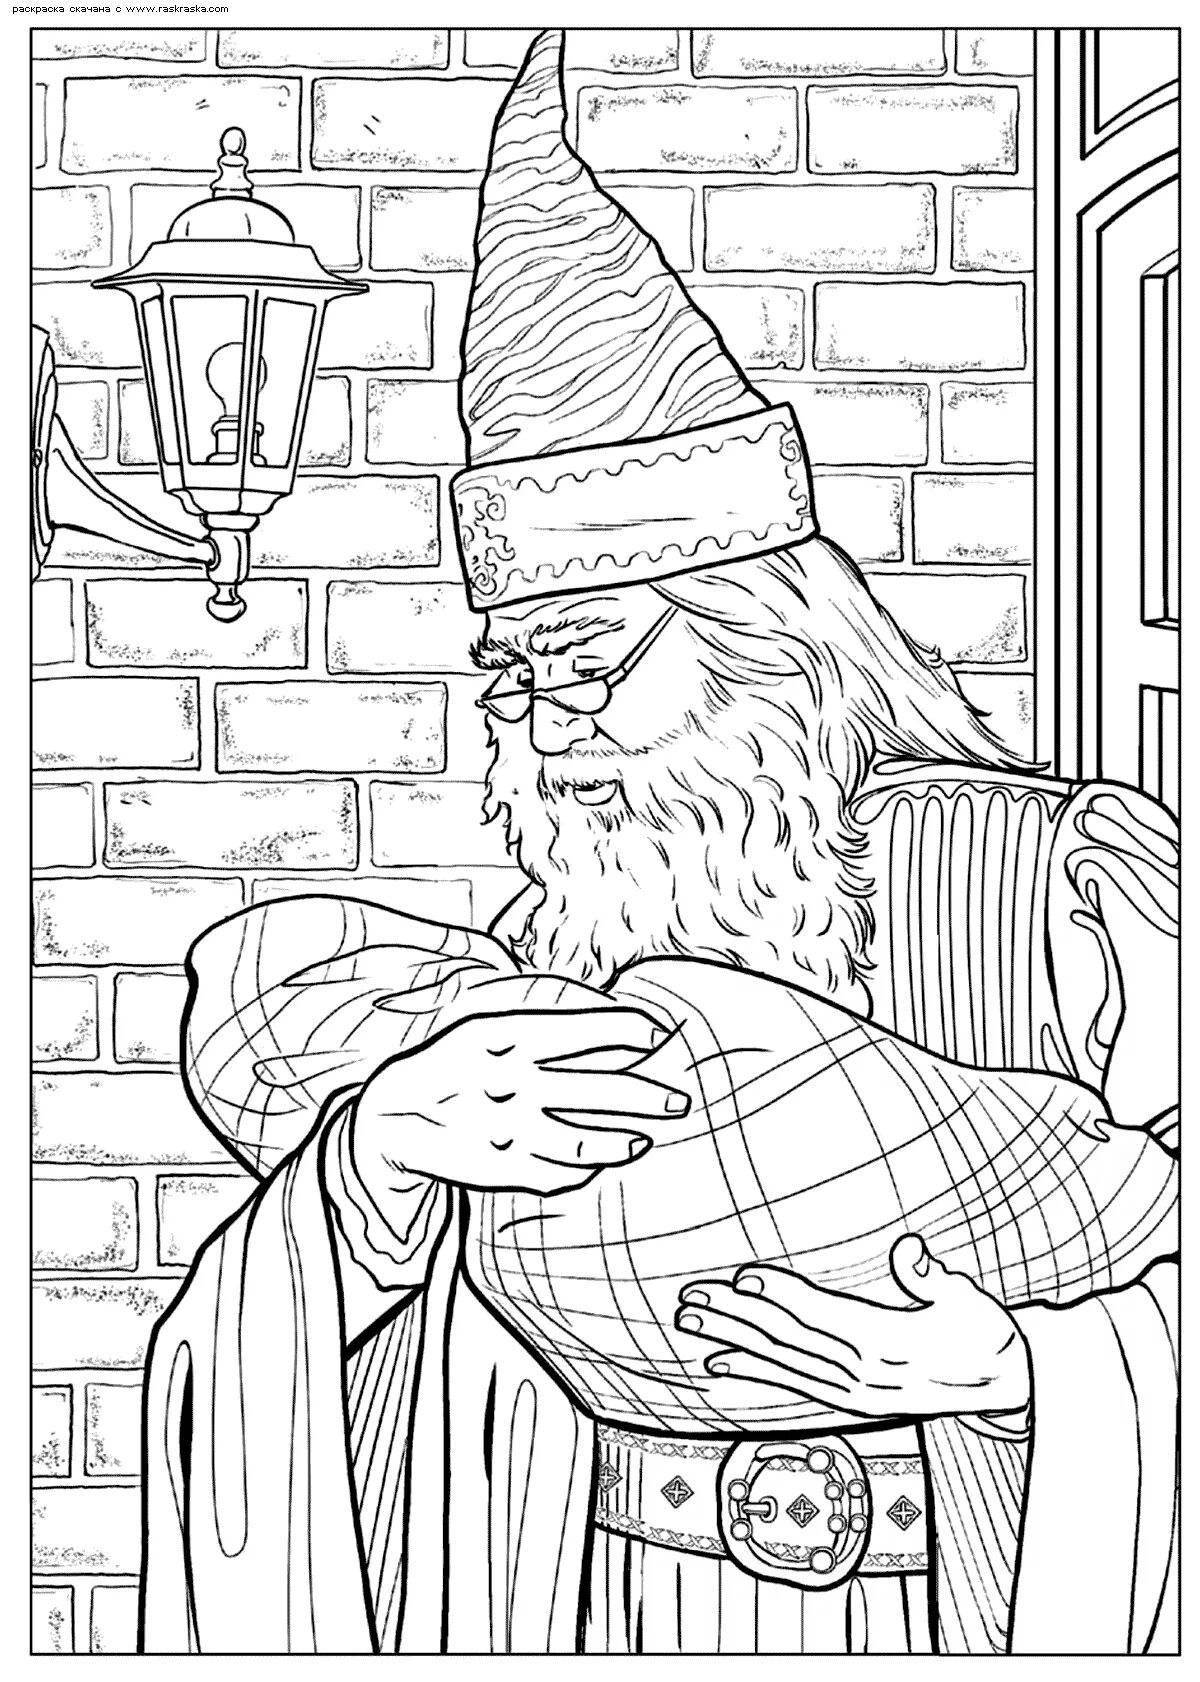 Dumbledore's glowing coloring book